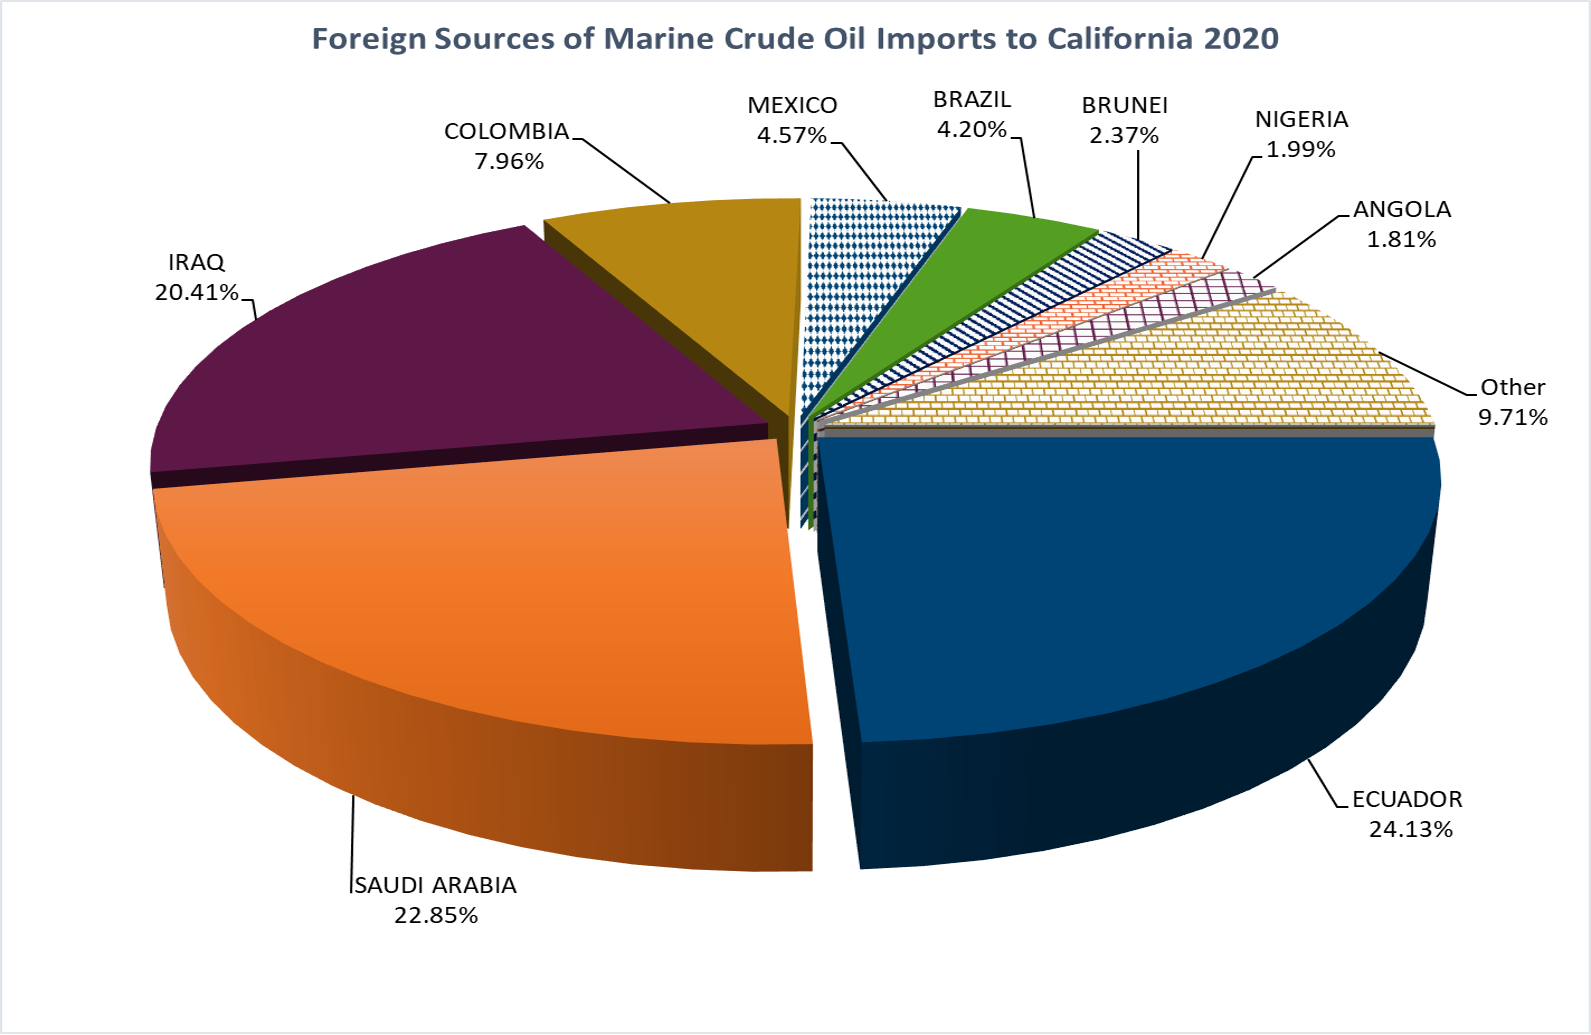 Graph of Foreign Sources of Marnine Crude Oil Imports to California 2020, Values are shown in table below.